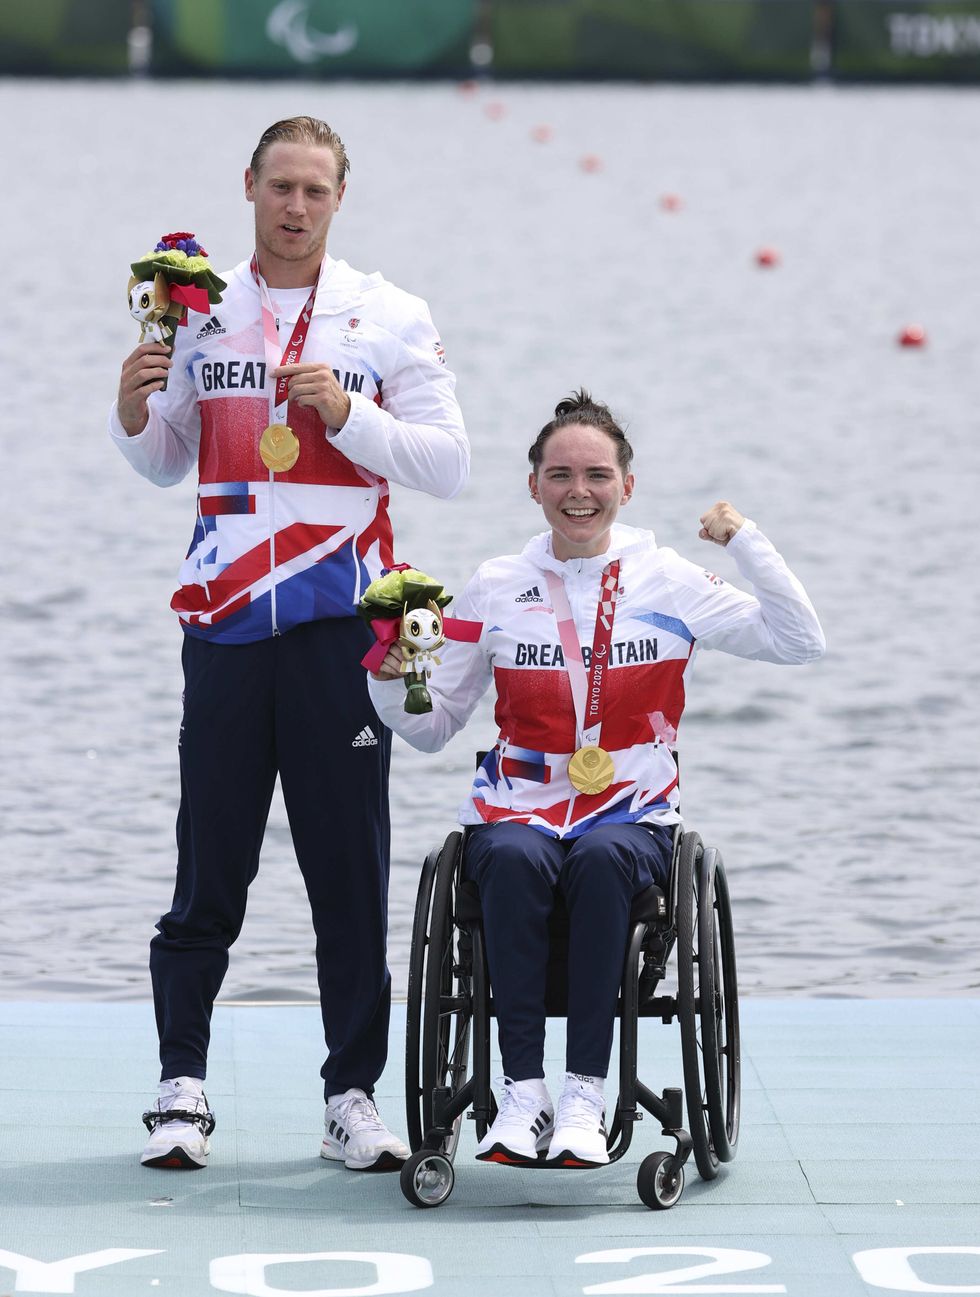 ParalympicsGB Rowers, Lauren Rowles and Laurence Whiteley (imagecommsralympicsGB)